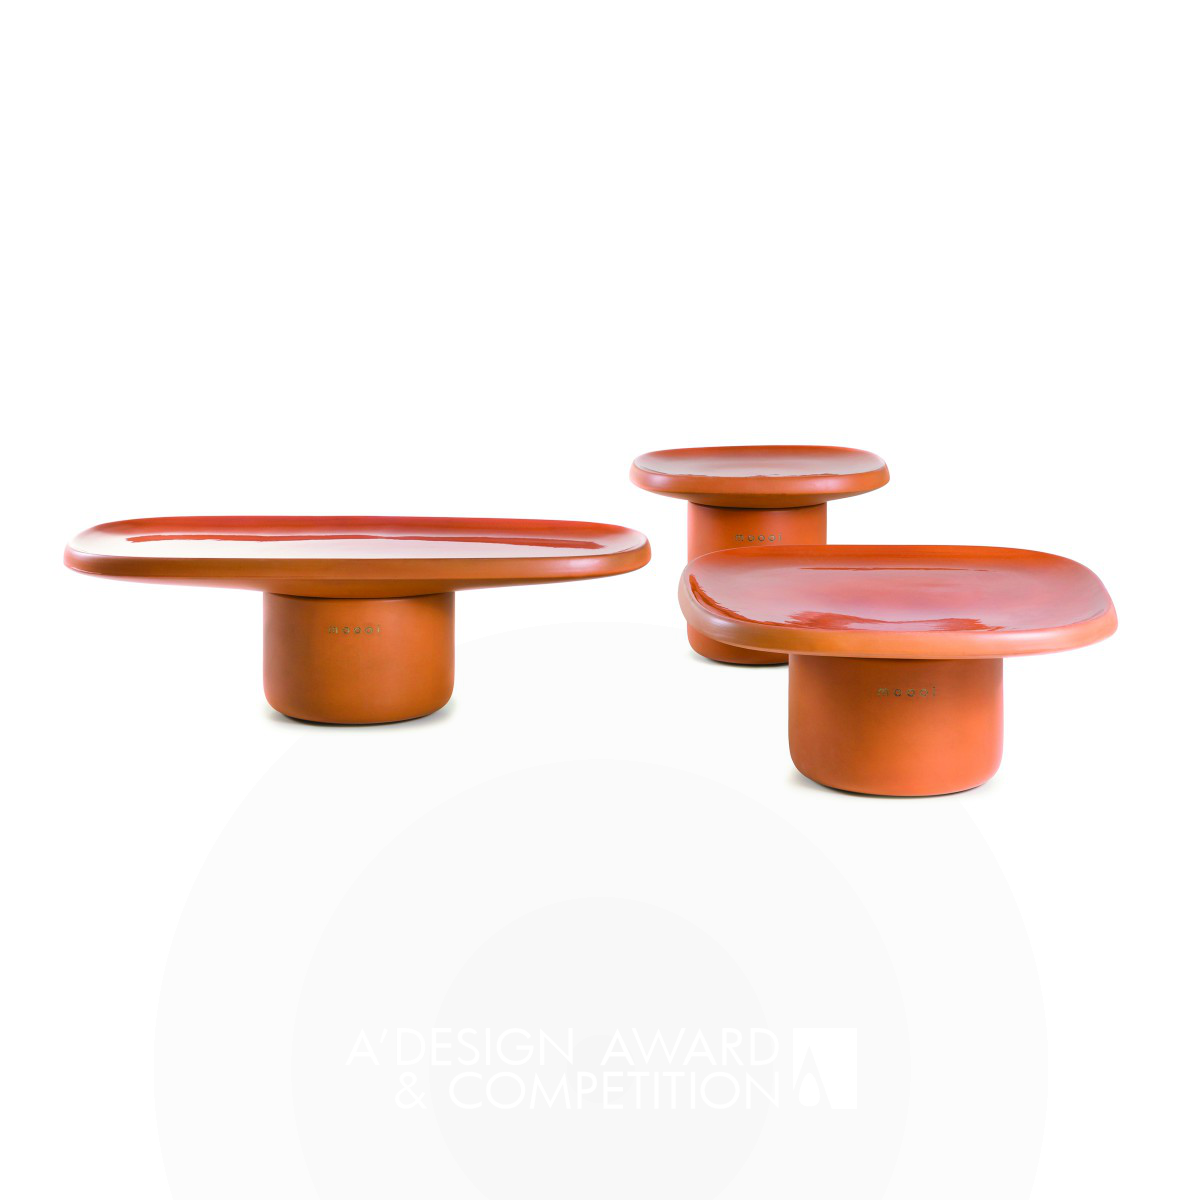 Obon Tables: A Fusion of Ancient Inspiration and Modern Design